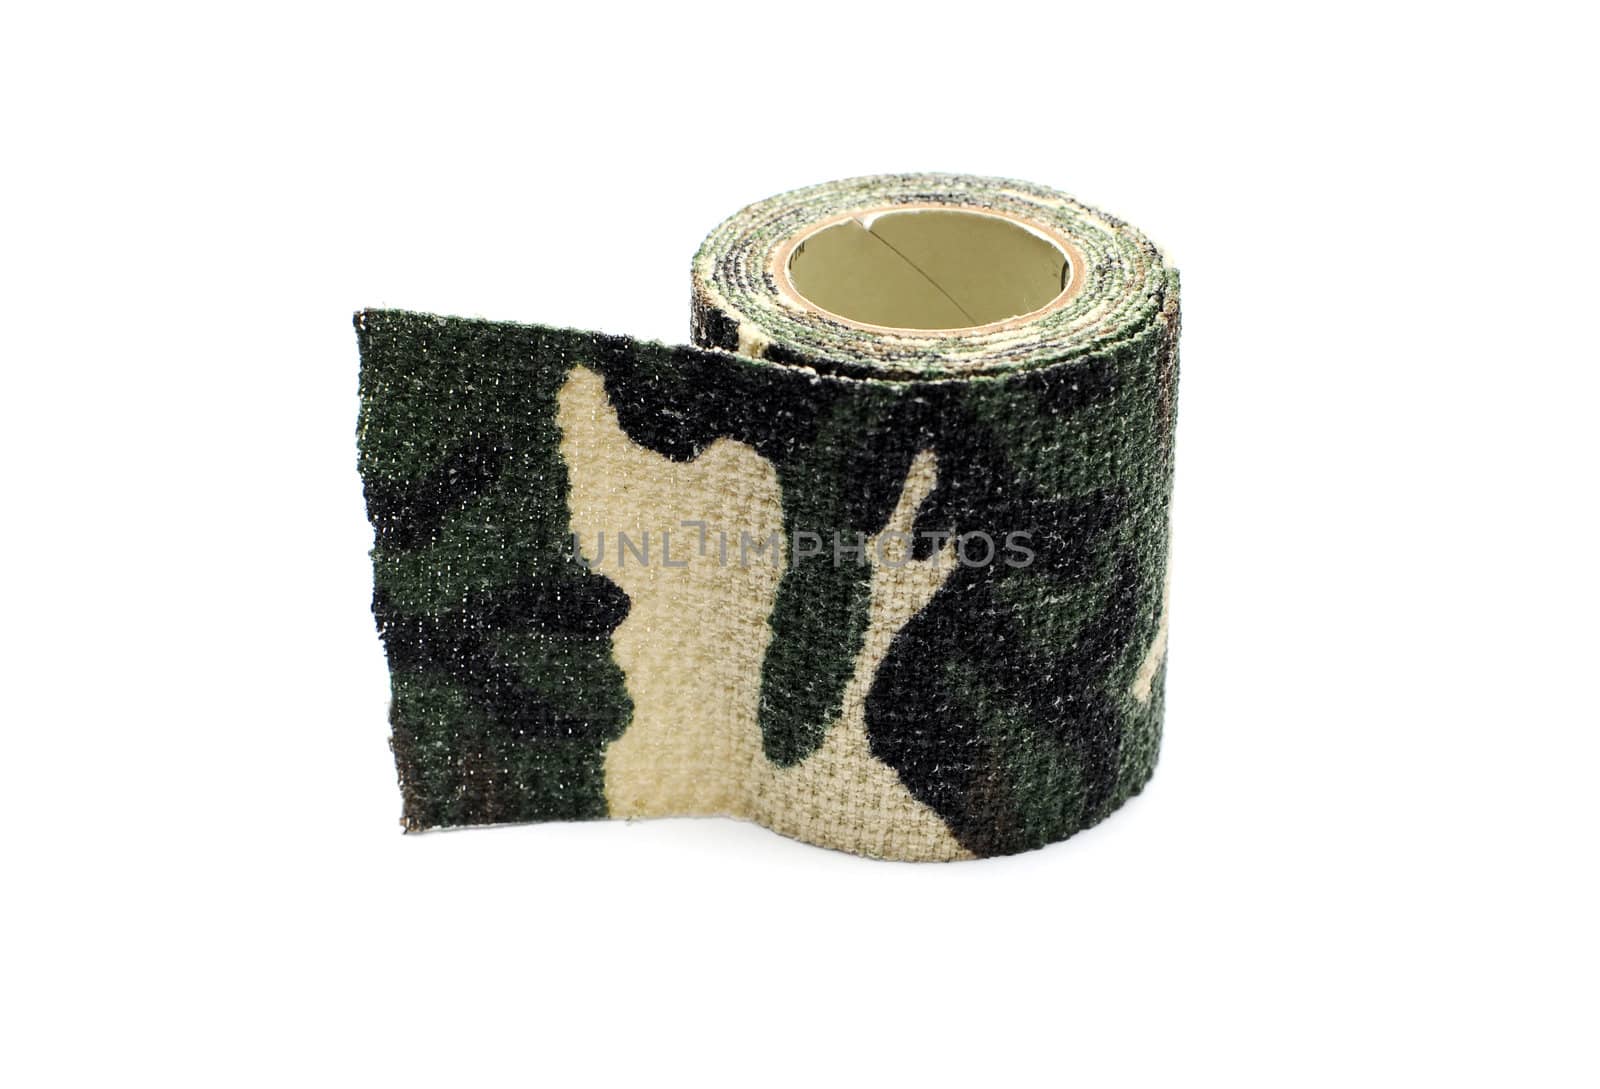 Roll of fabric camouflage tape on a white background by DNKSTUDIO